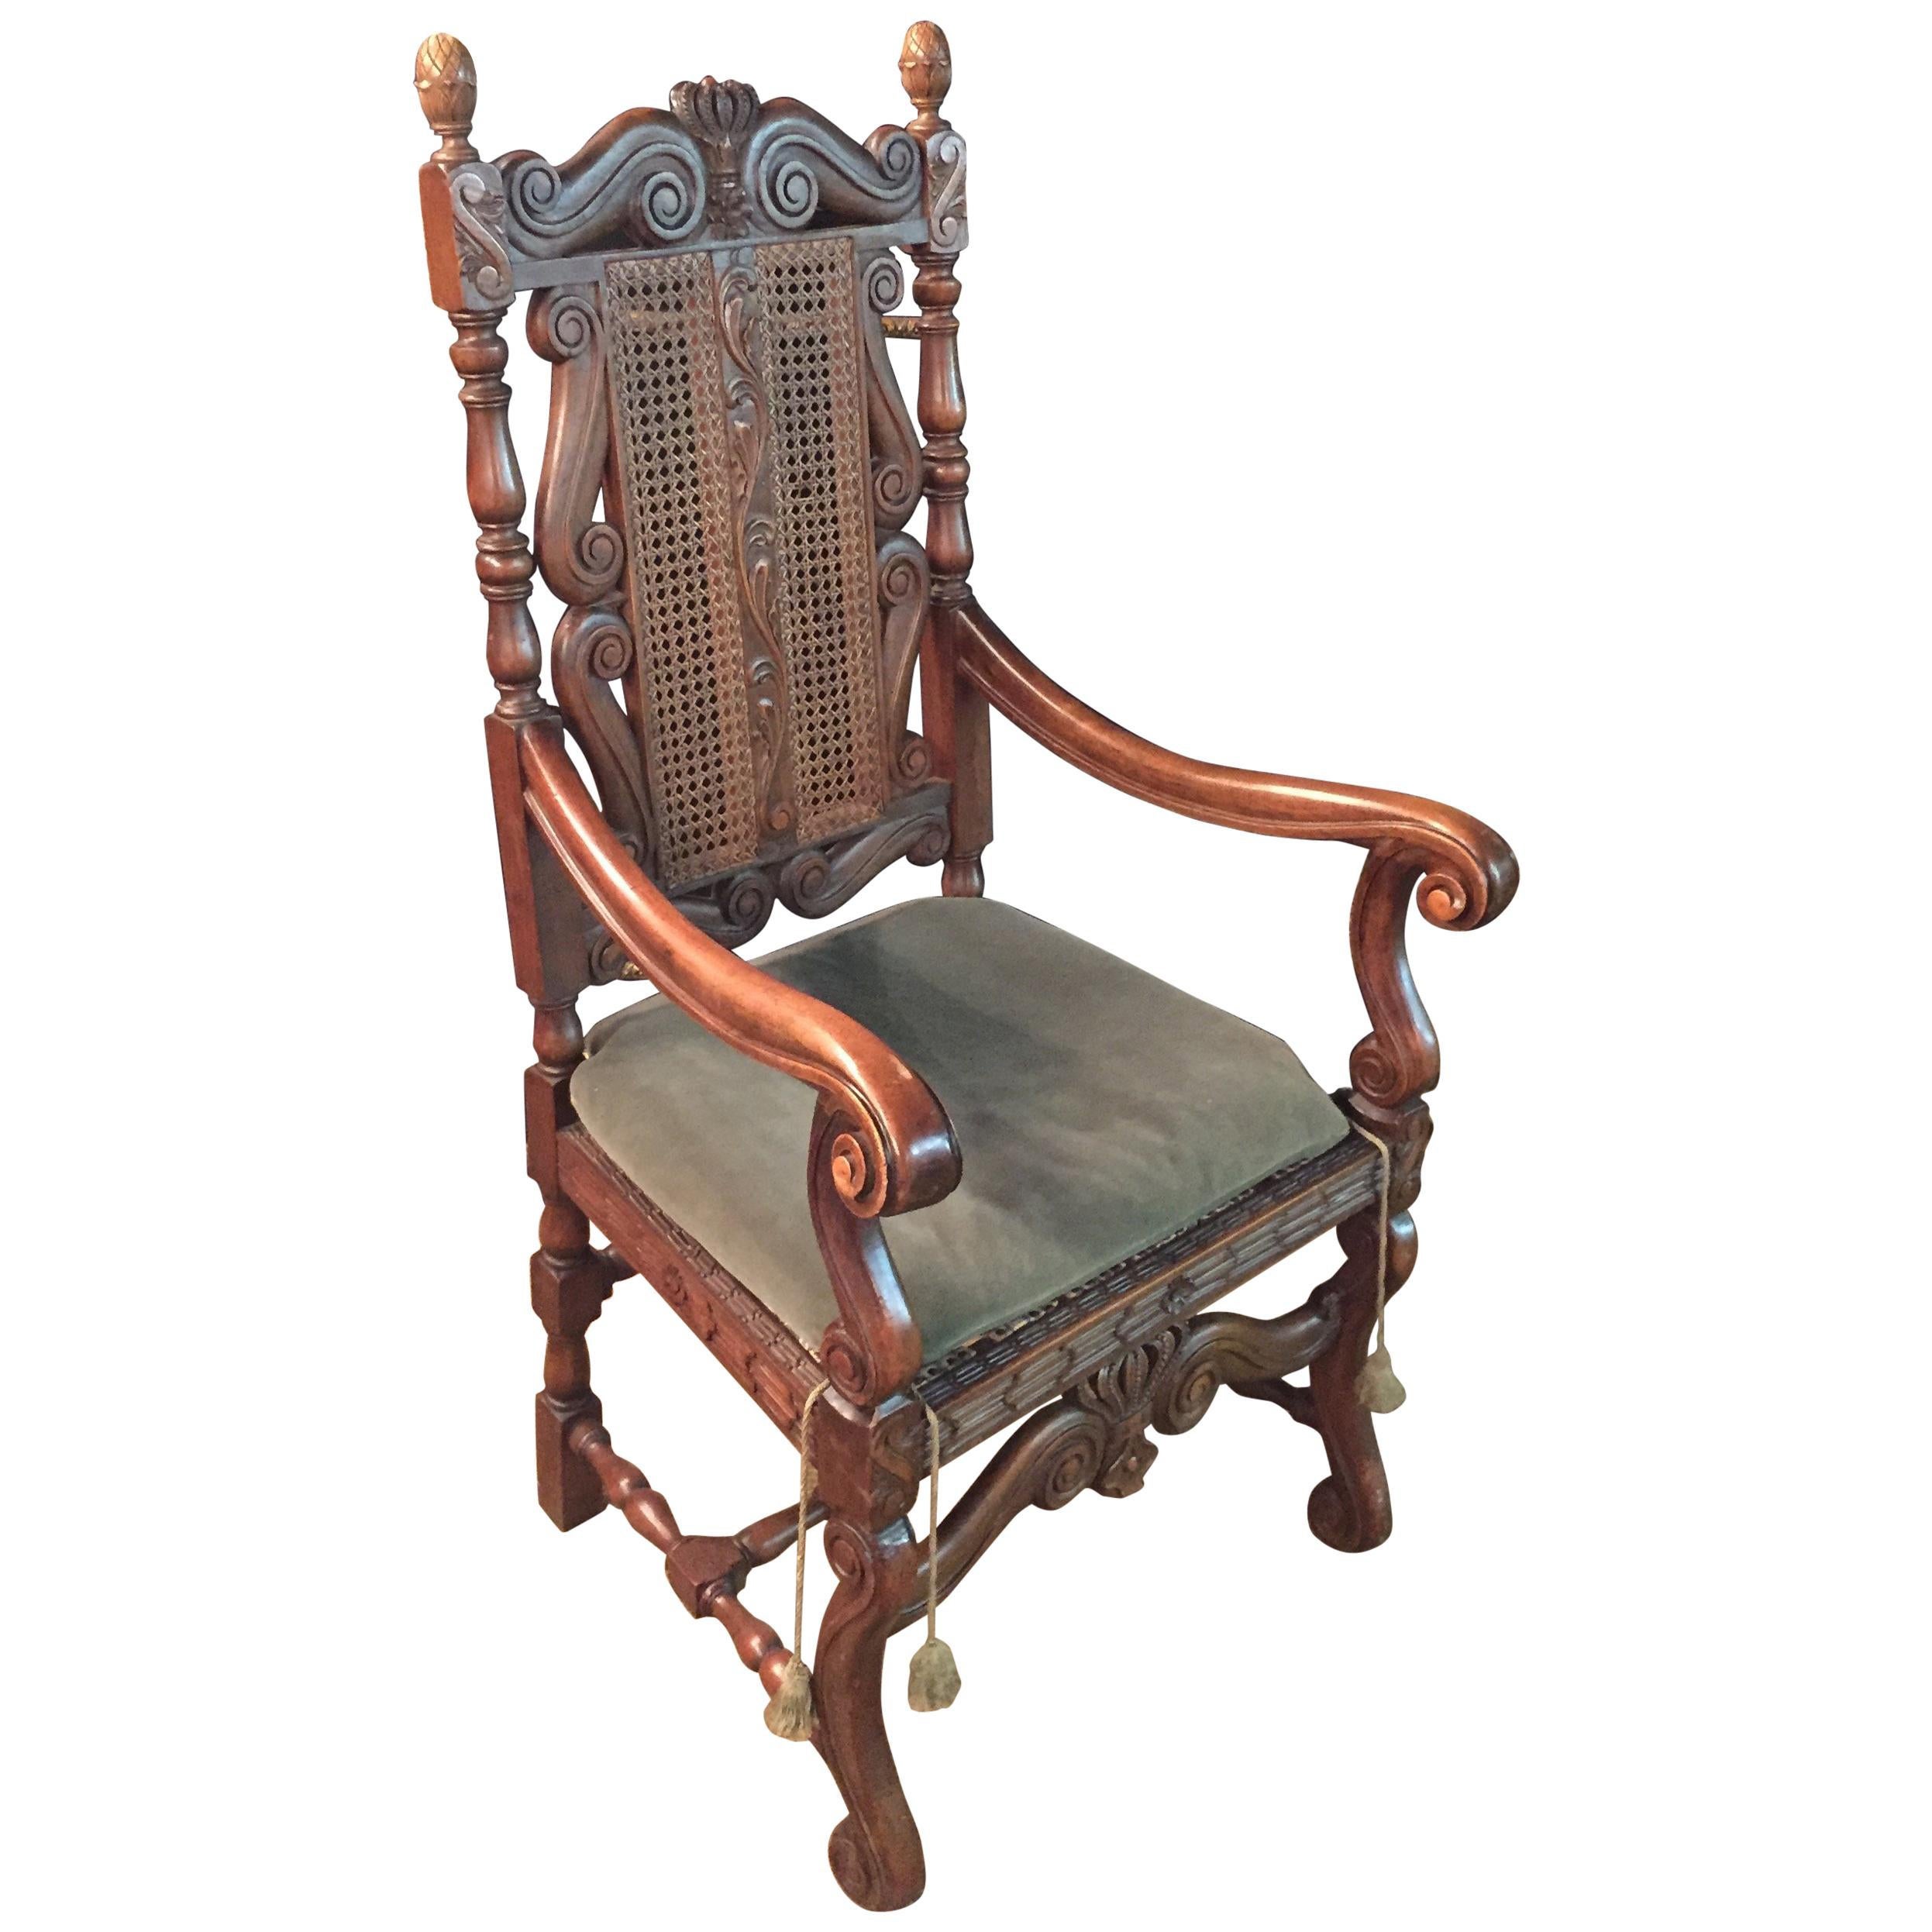 Antique Baroque Throne Armchair Fully Carved with Crown, circa 1880 Walnut For Sale